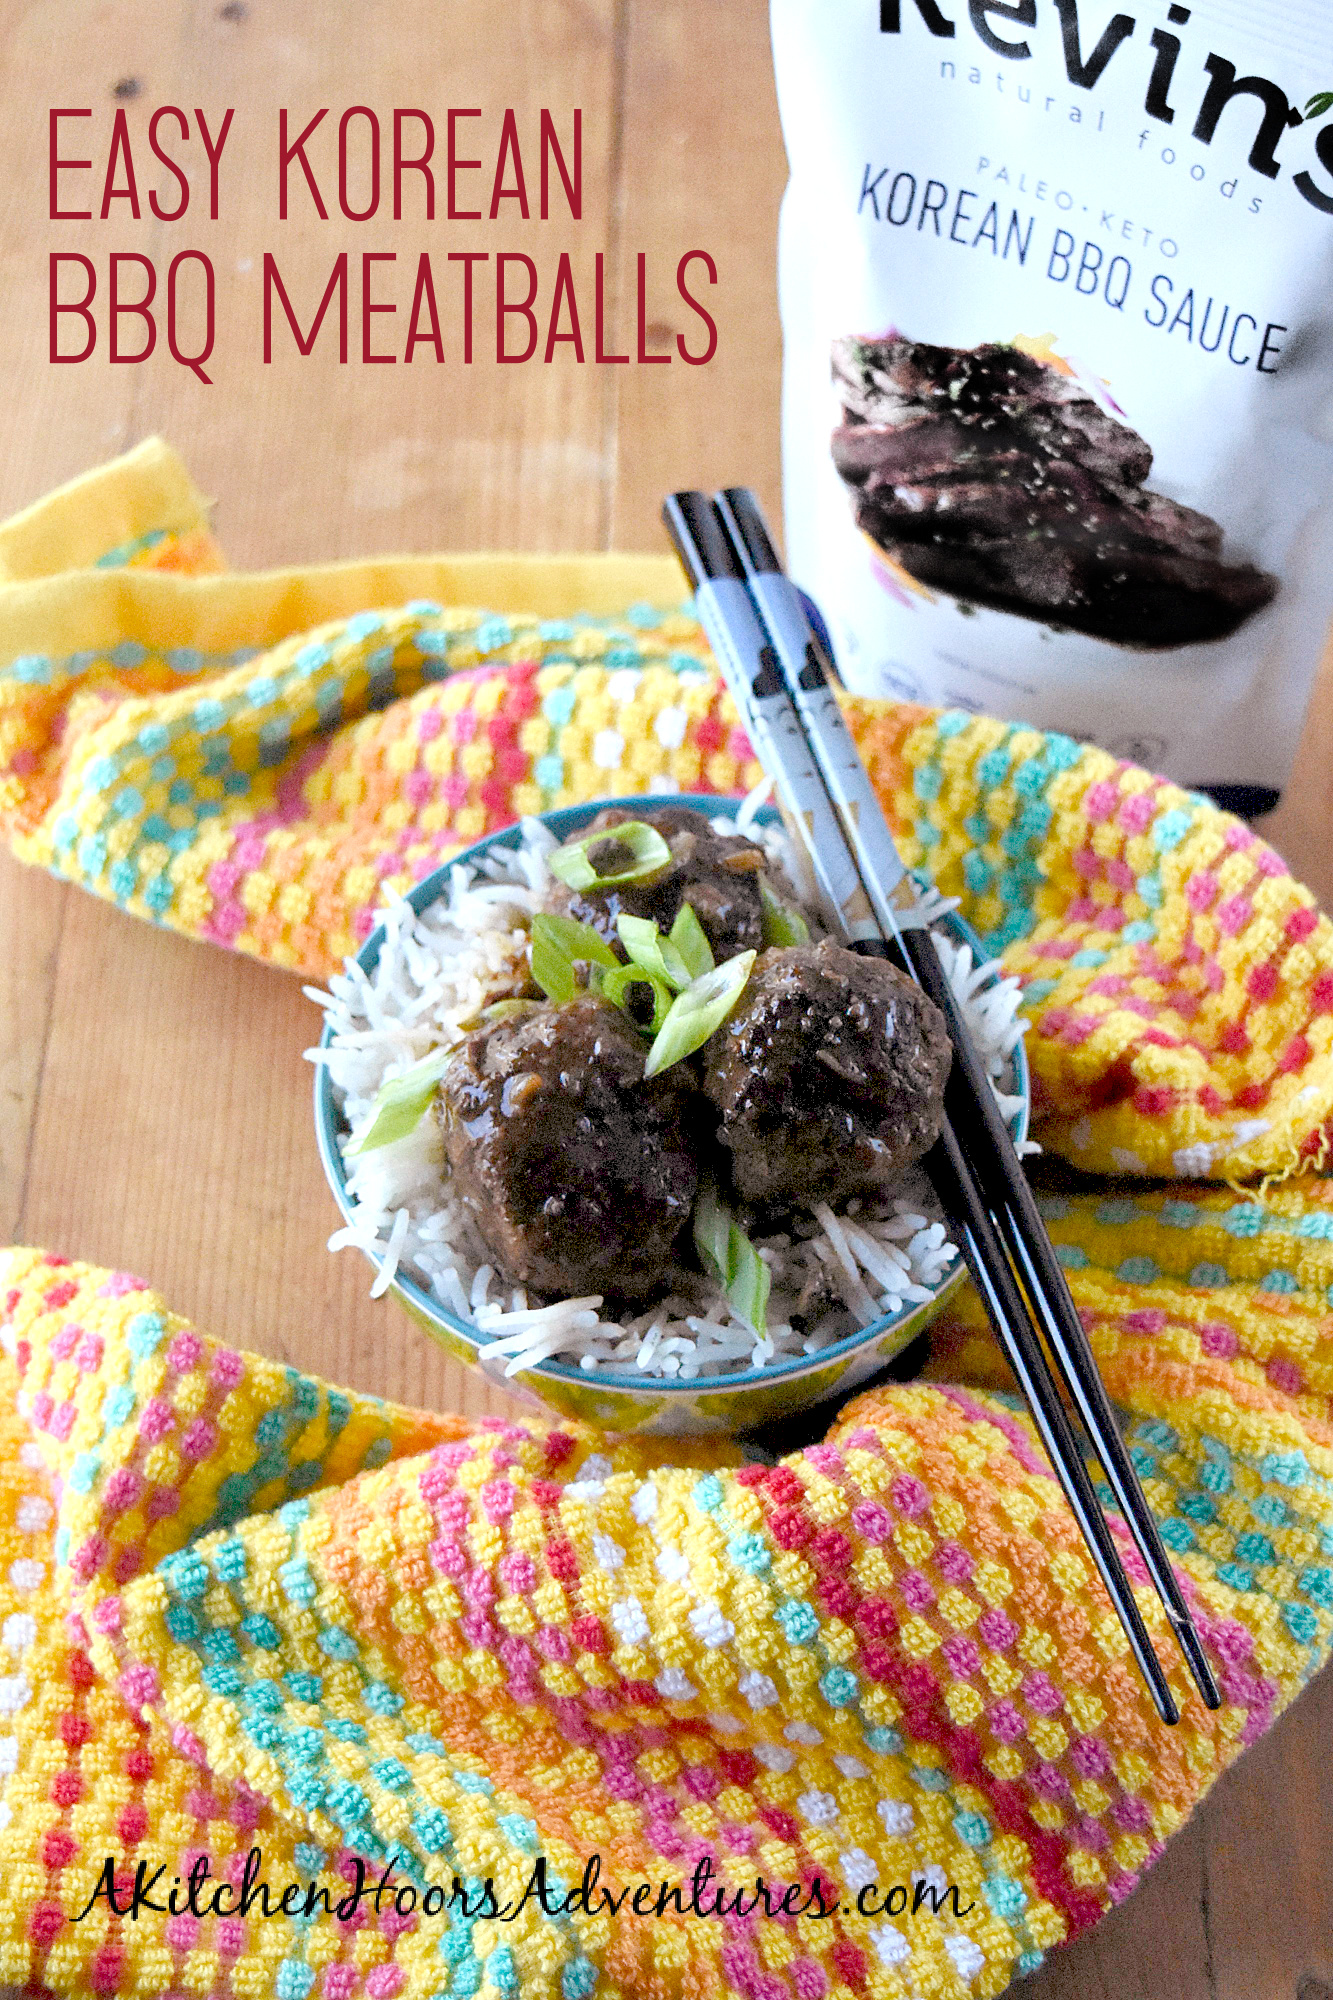 Easy Korean BBQ Meatballs have delicious Asian flavors that is on the table in under 30 minutes. They’re cooked up in the InstantPot, made with a delicious sauce, and packed with delicious bulgogi style flavors. #eatcleanlivehappy #kevinsnaturalfoods #kevinsrecipechallenge